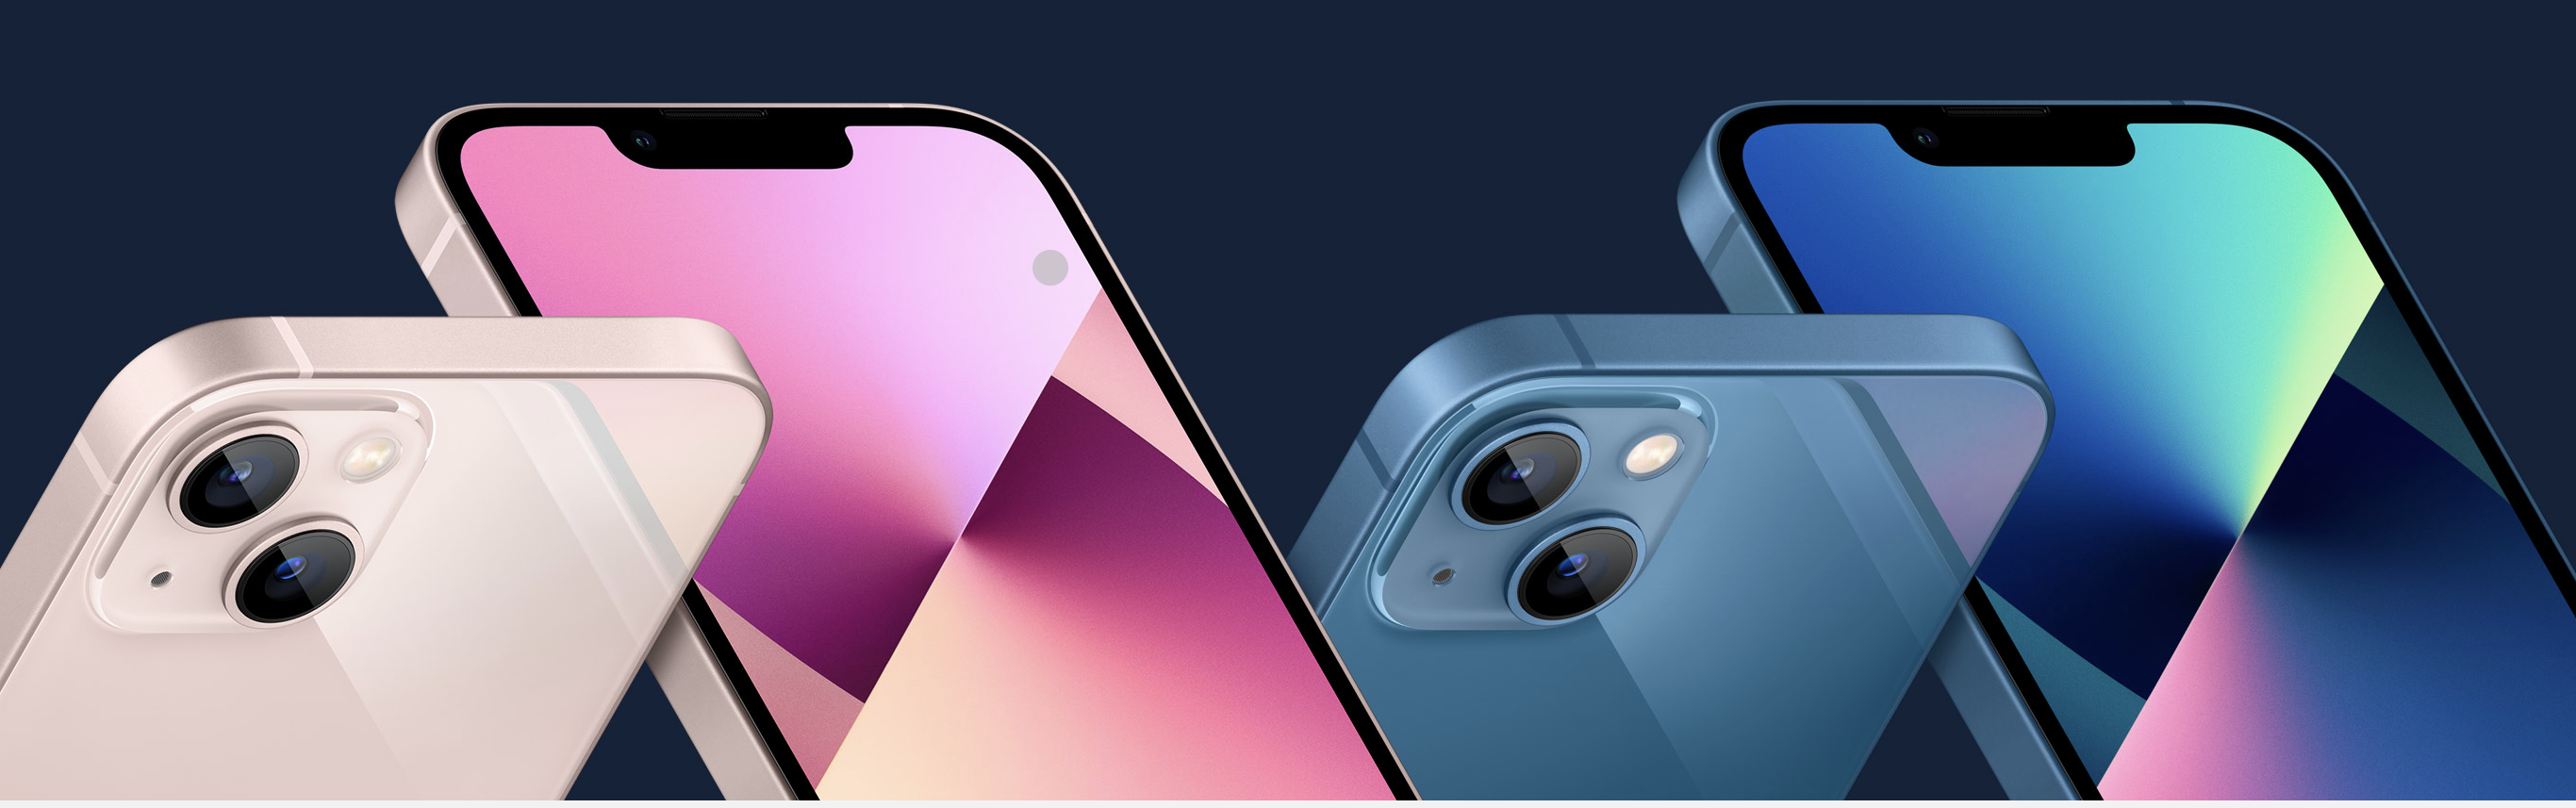 The 10 best iPhone wallpapers of 2021